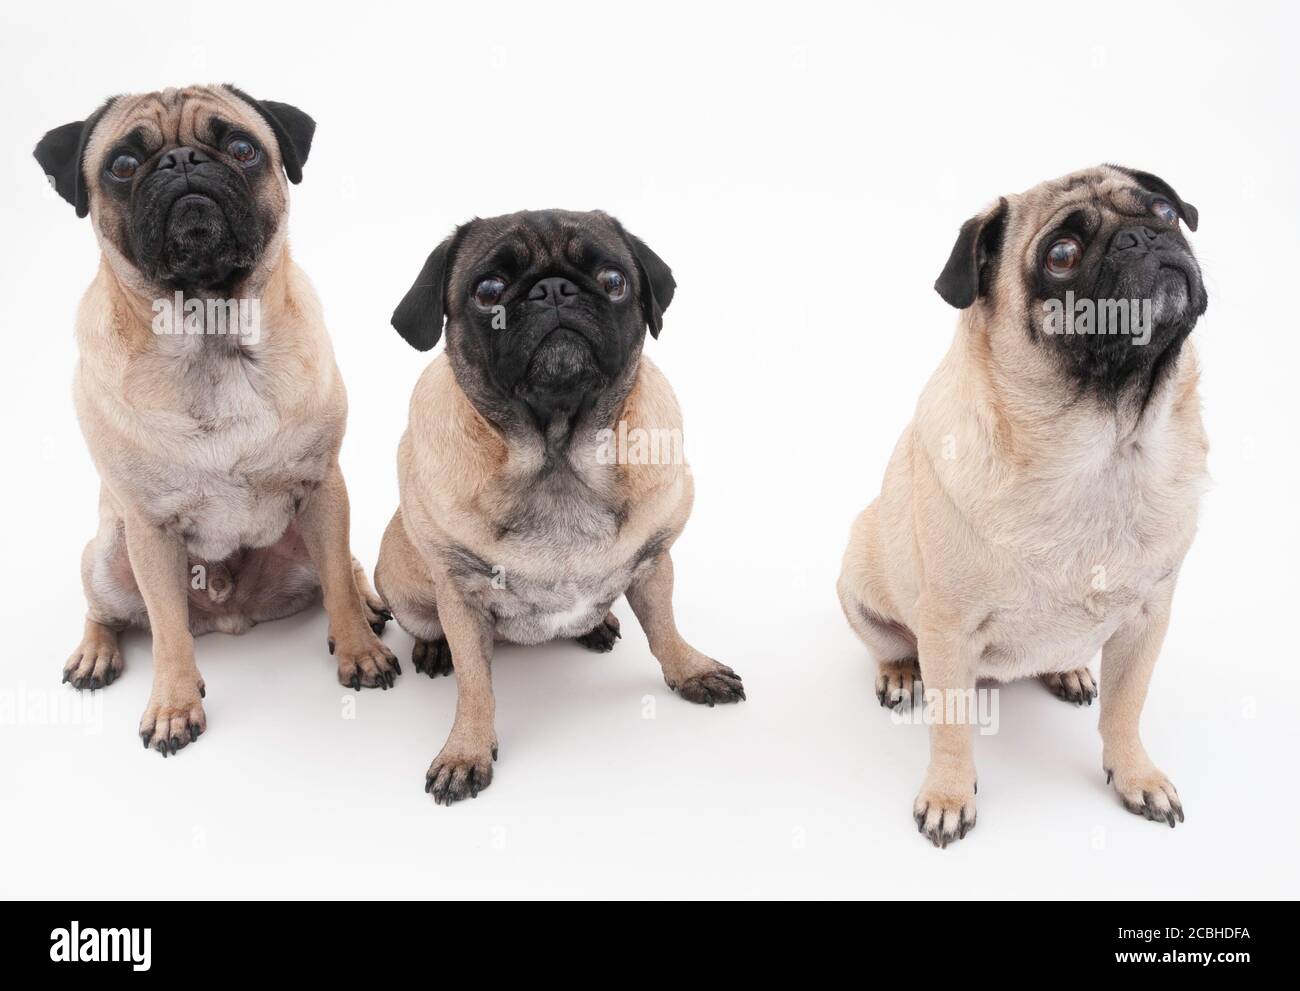 Three Isolated Pugs on a White Background Stock Photo